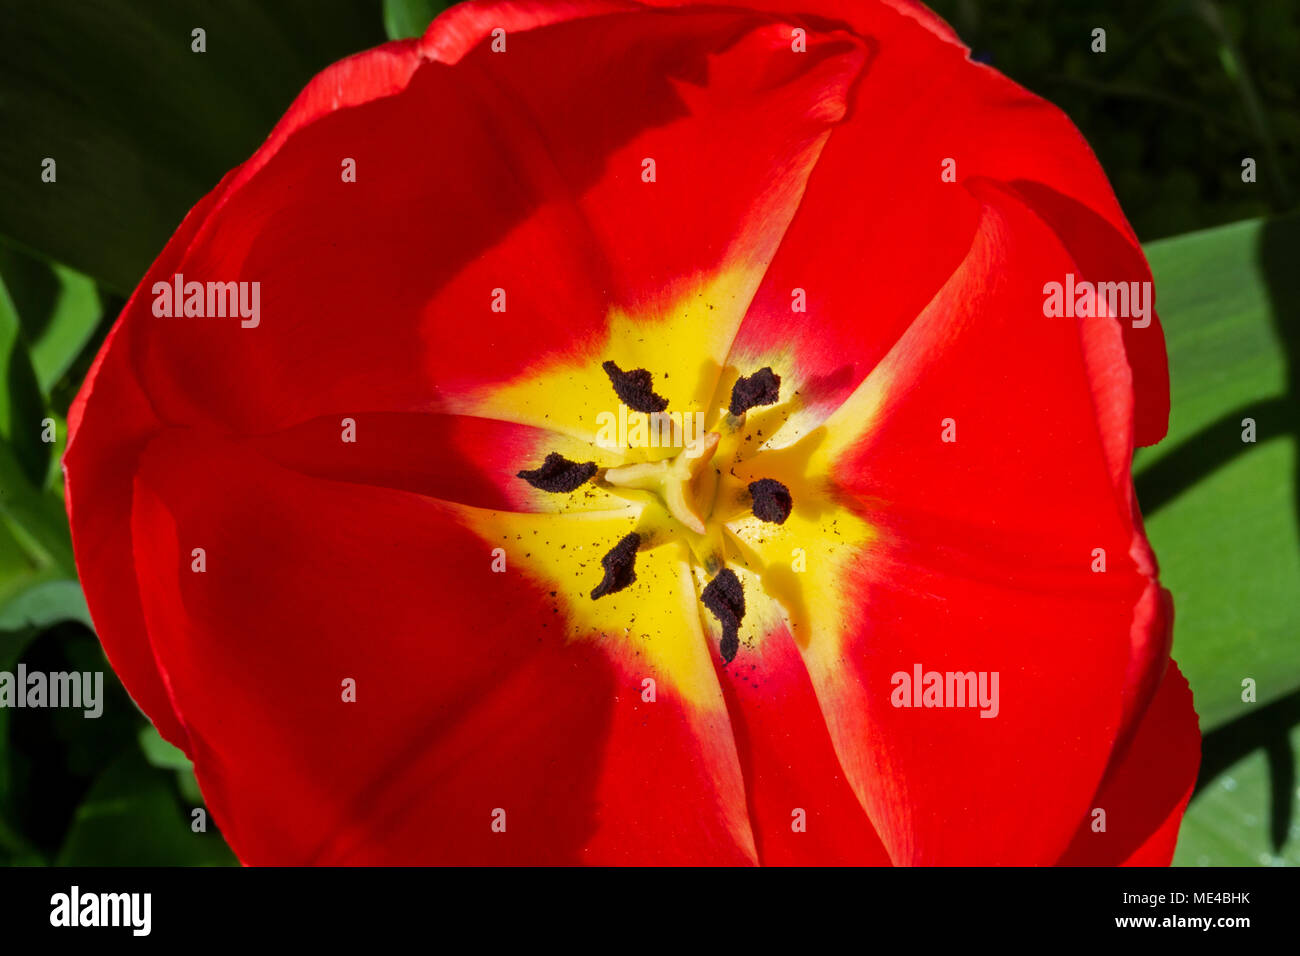 Close up of the inside of a Red Tulip with yellow centre, showing the stigma and anther. Stock Photo